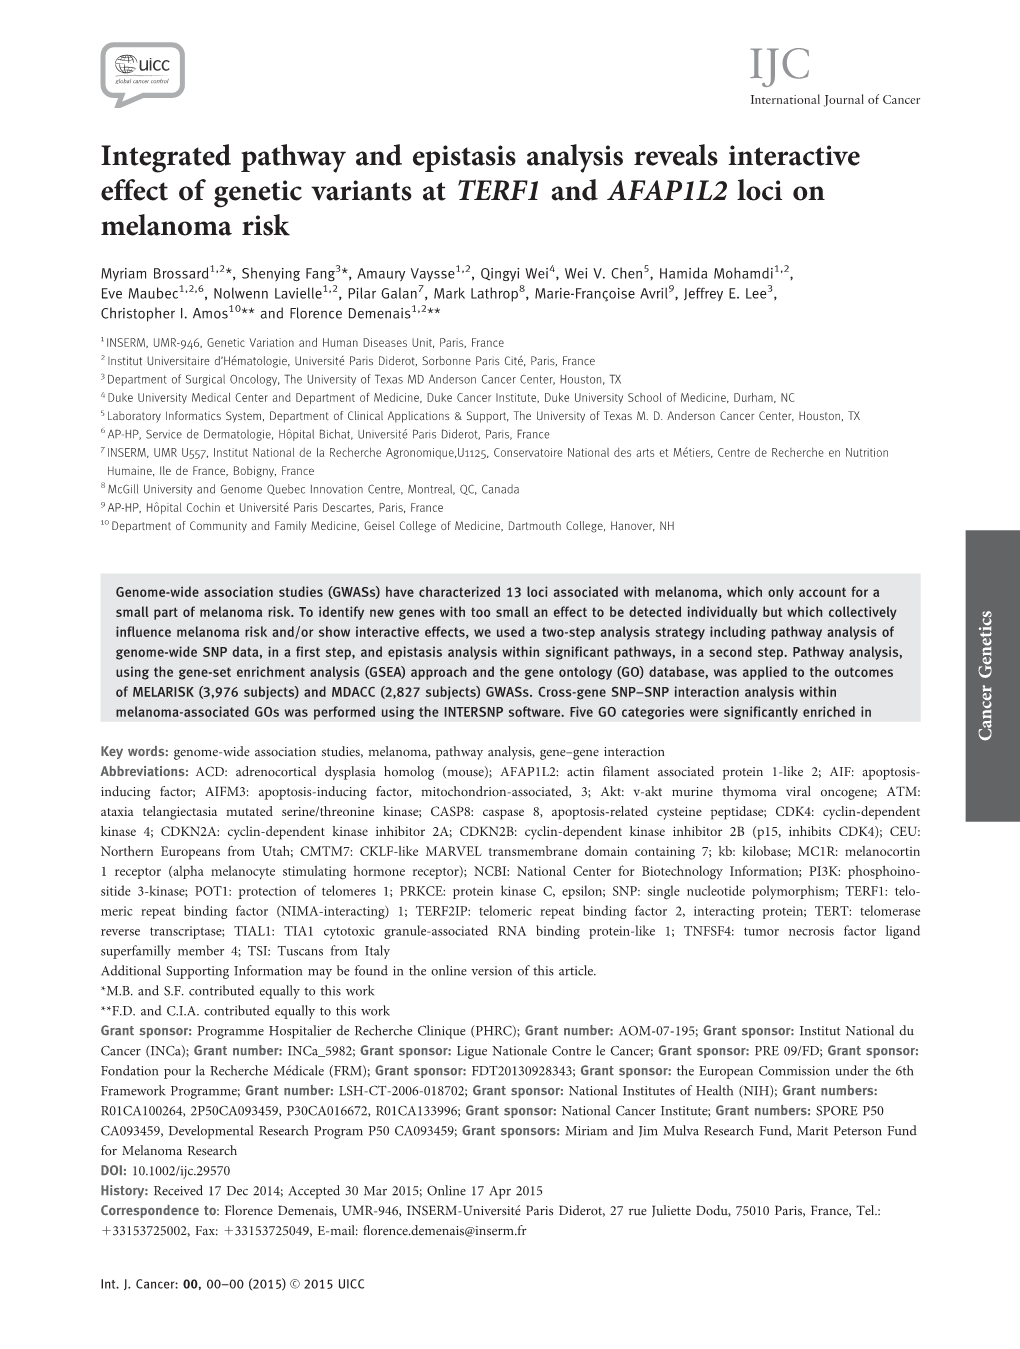 Integrated Pathway and Epistasis Analysis Reveals Interactive Effect of Genetic Variants at TERF1 and AFAP1L2 Loci on Melanoma Risk